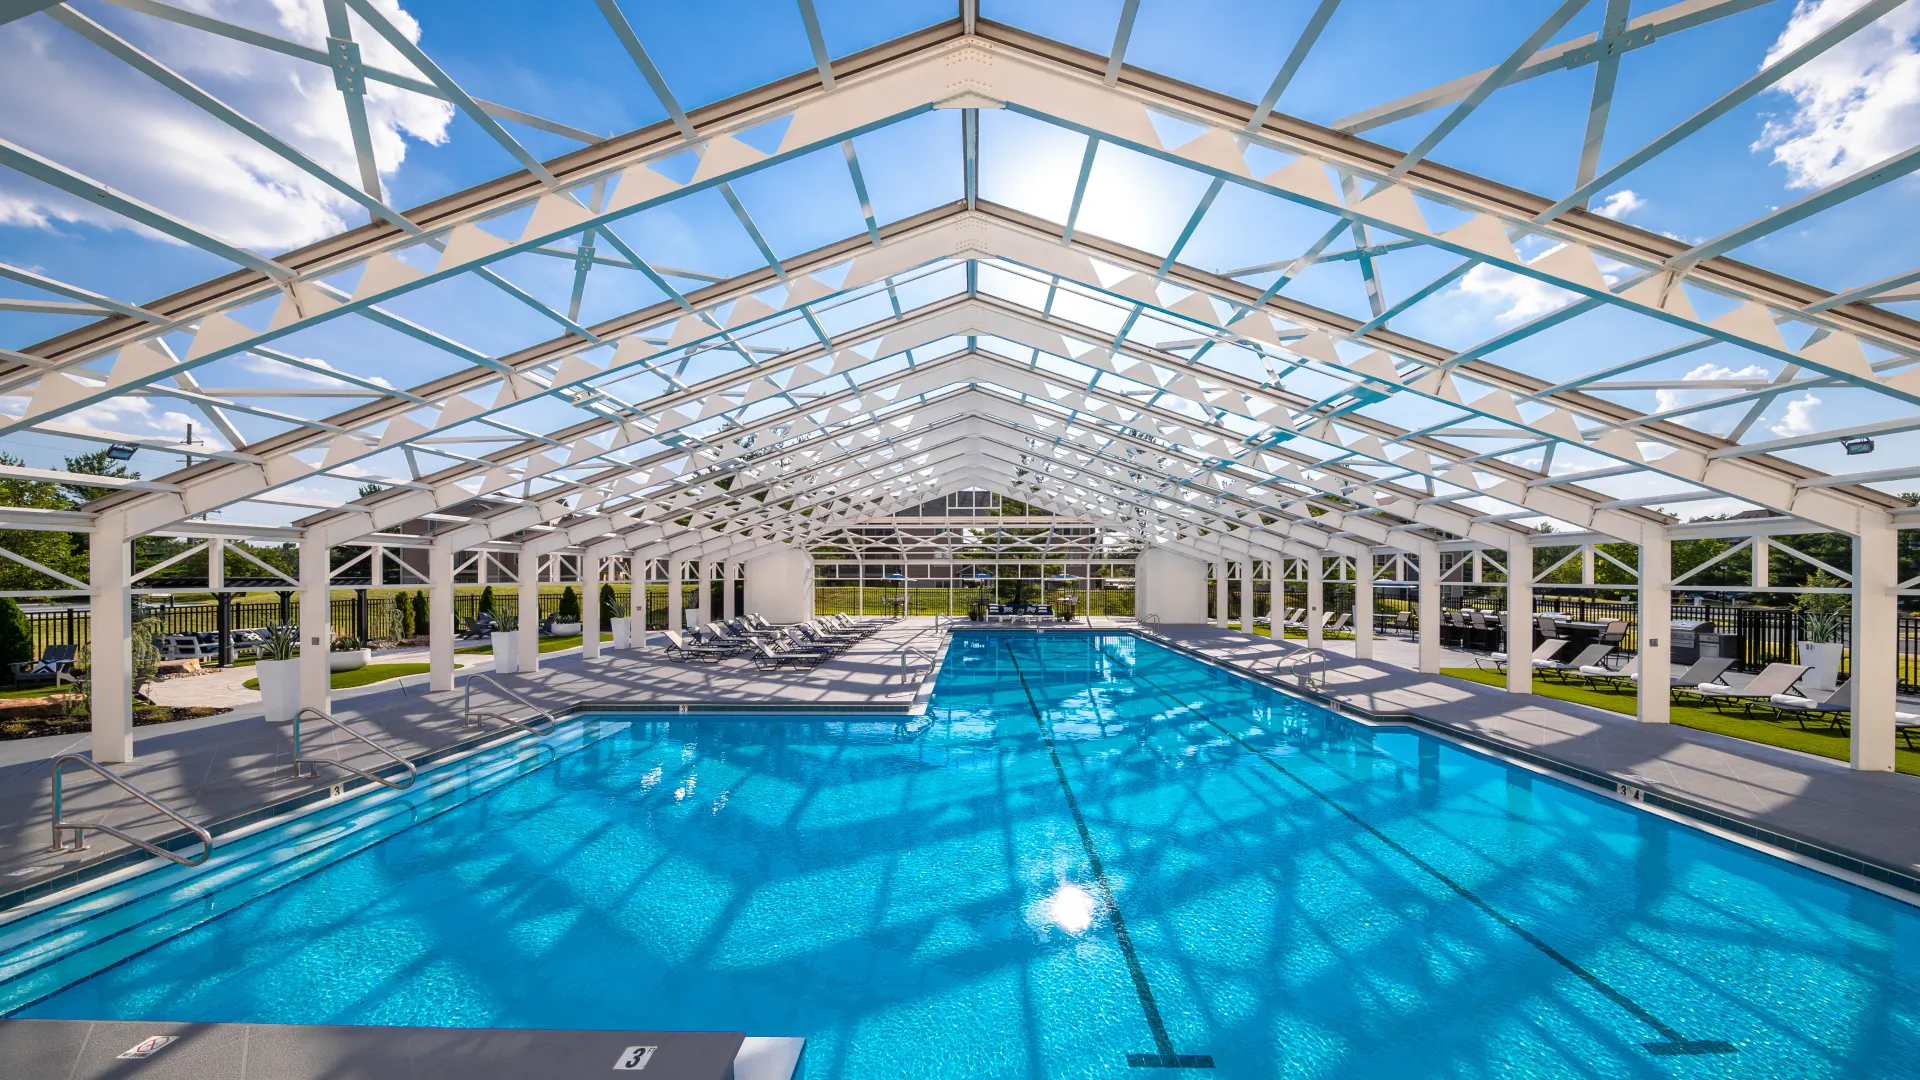 Enclosed pool area with a spacious swimming pool, lounge chairs, and natural light streaming through the glass roof structure.